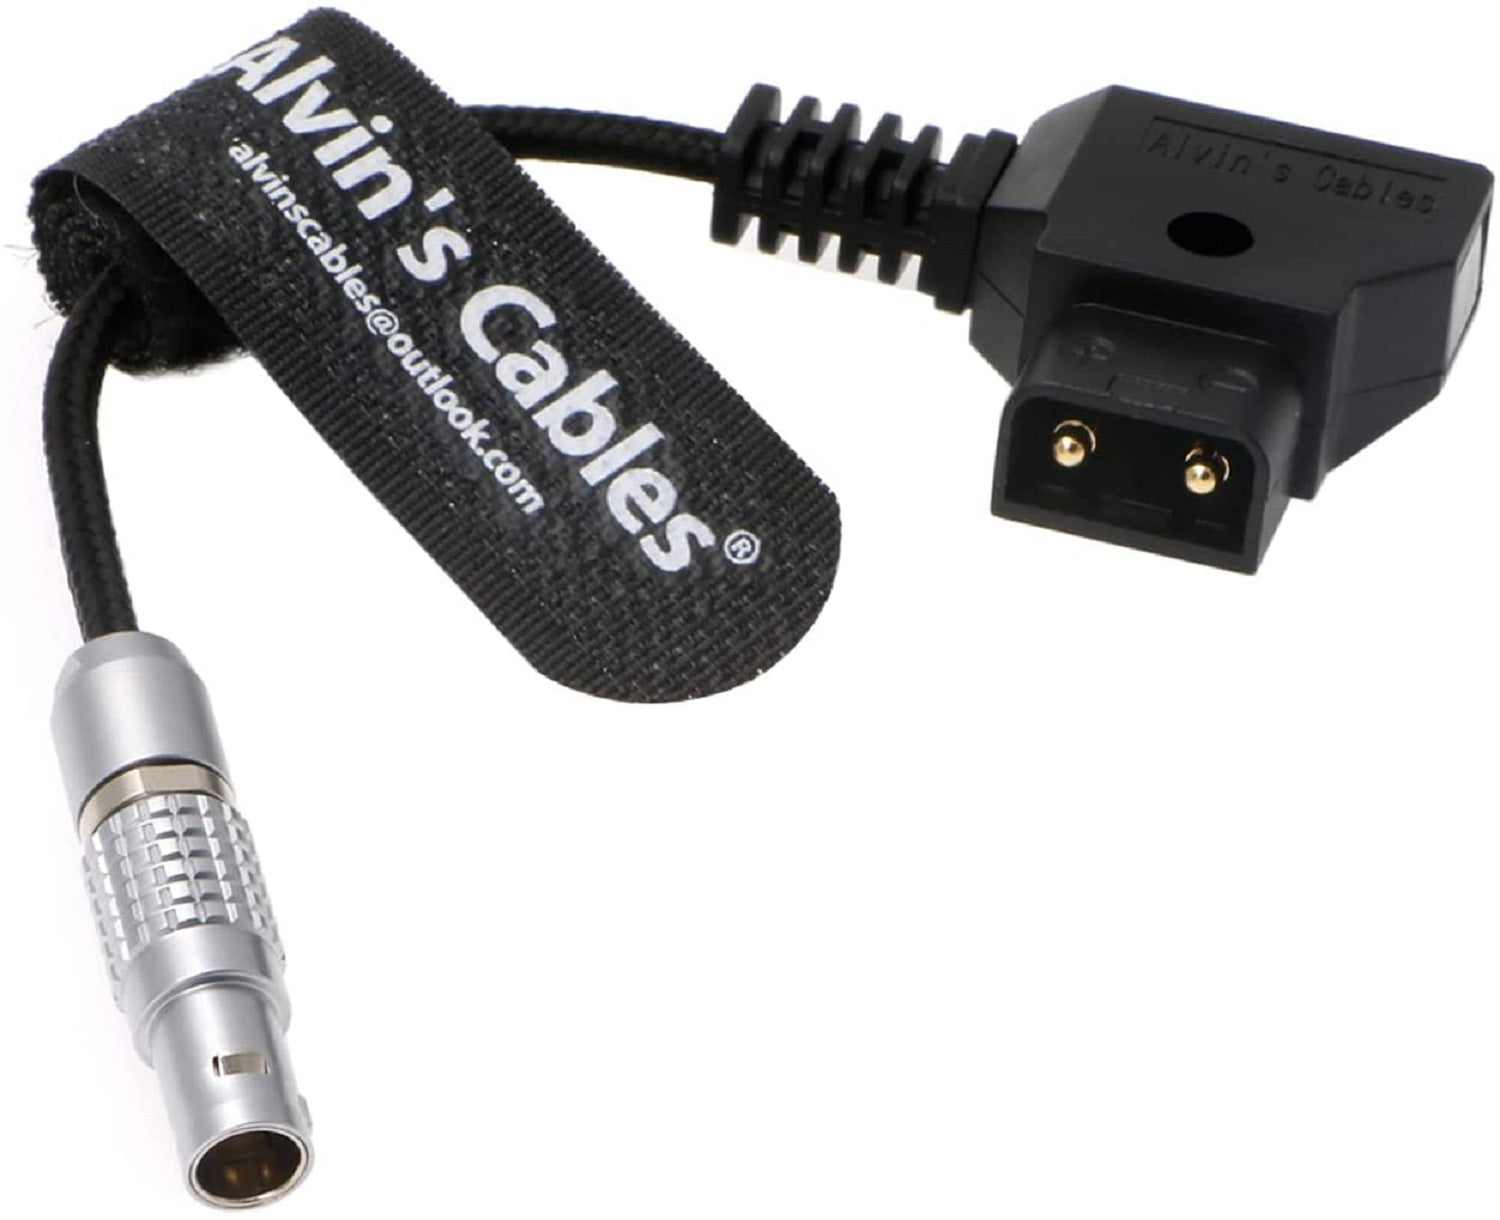 Power-Cable for Teradek|ARRI 2-Pin-Male to Reverse D-Tap Flexible Braided Cable 7CM Alvin's Cables